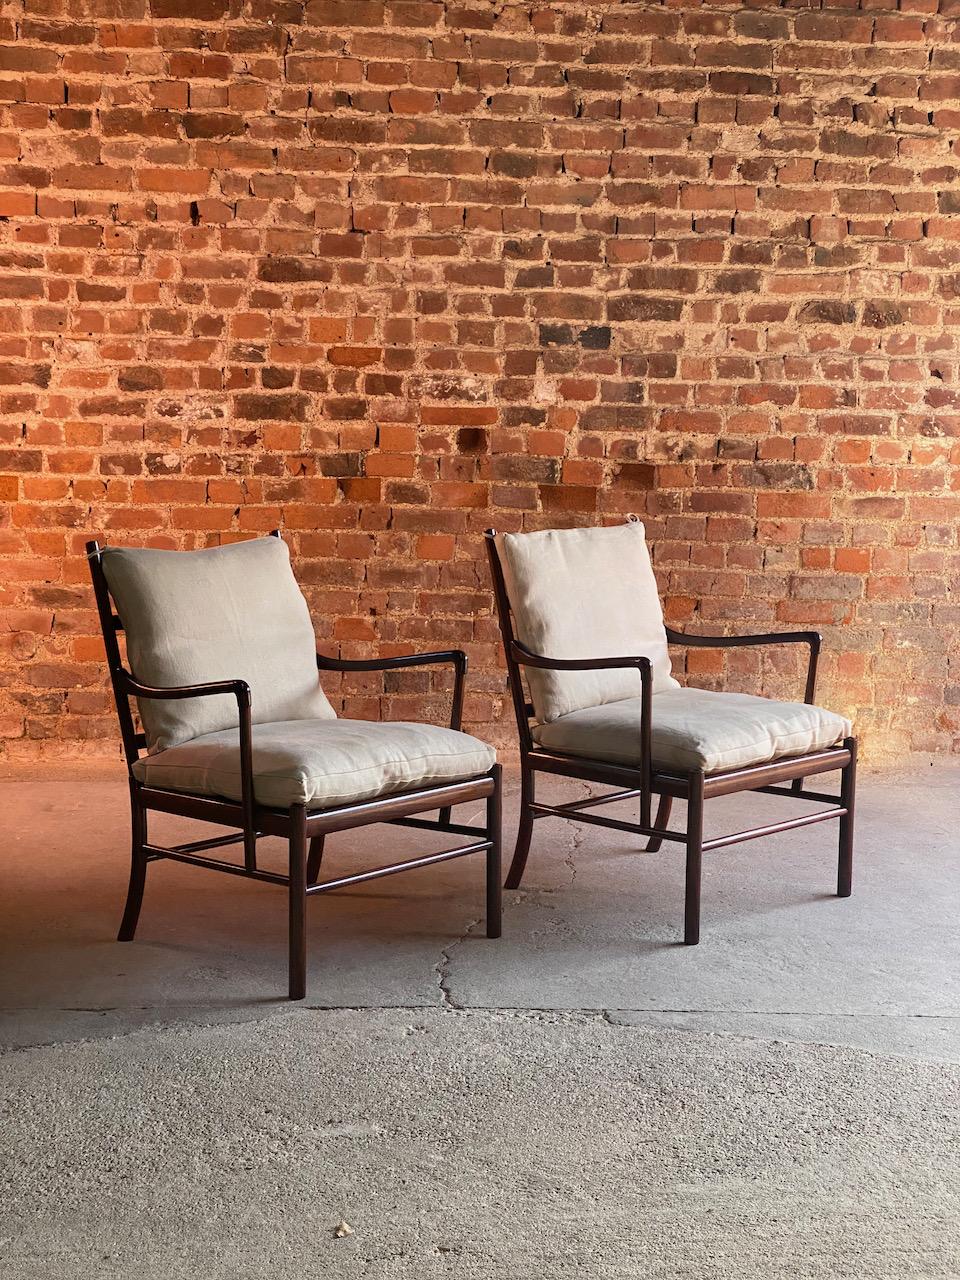 Mid-20th Century Ole Wanscher Model 149 Rosewood Colonial Chairs Pair by Poul Jeppesens, Denmark